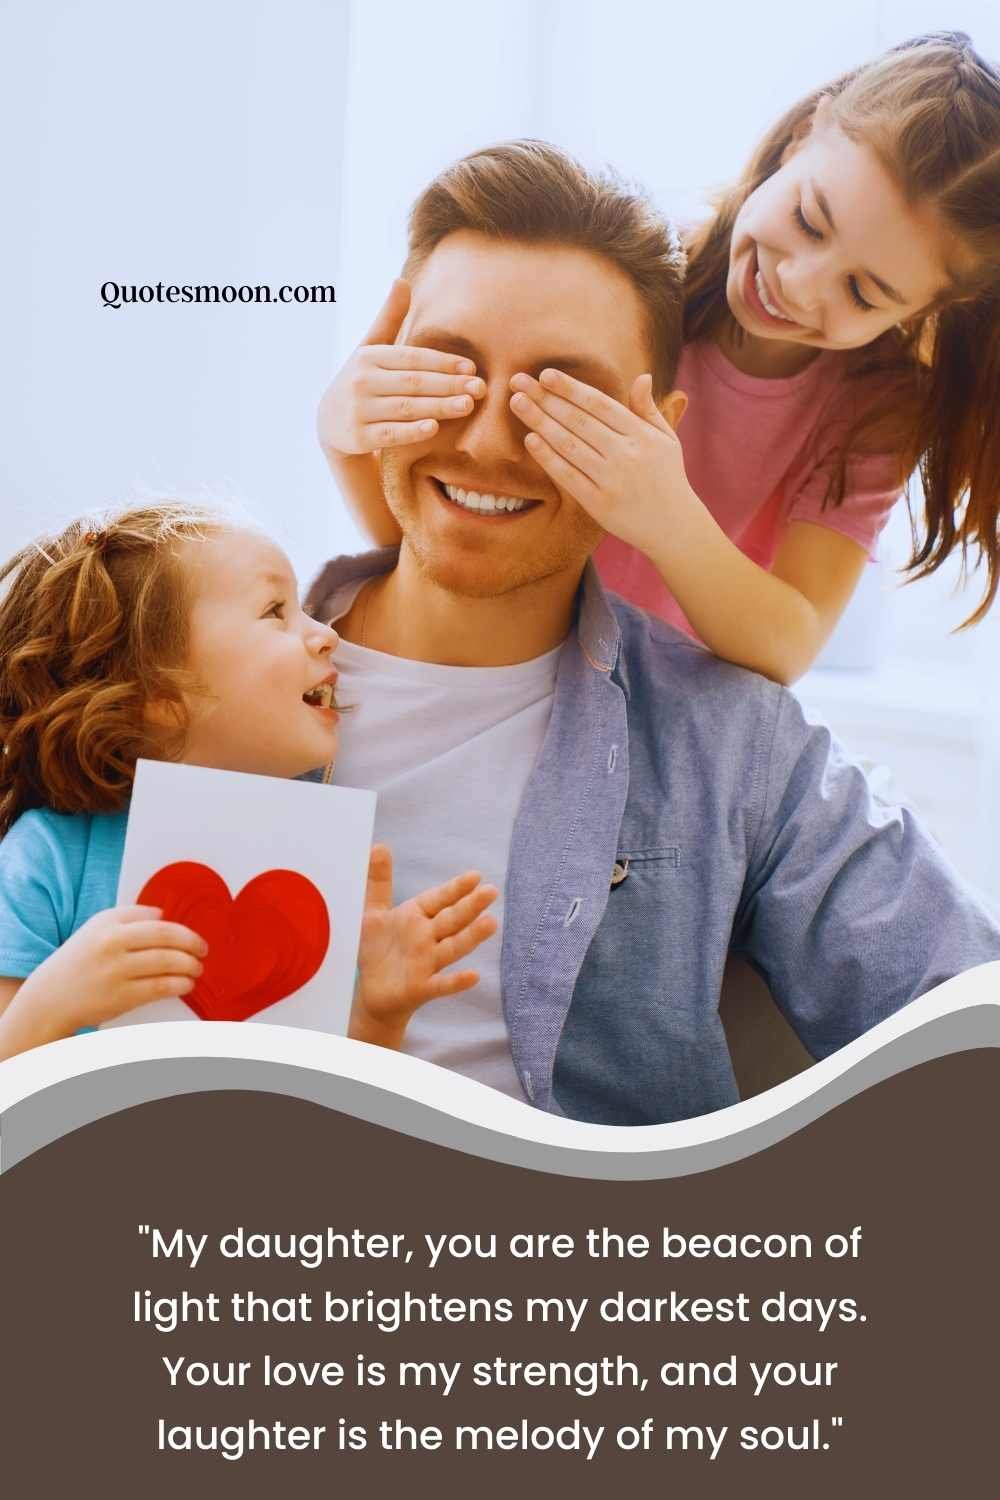 Dad and Daughter Quotes and Sayings image